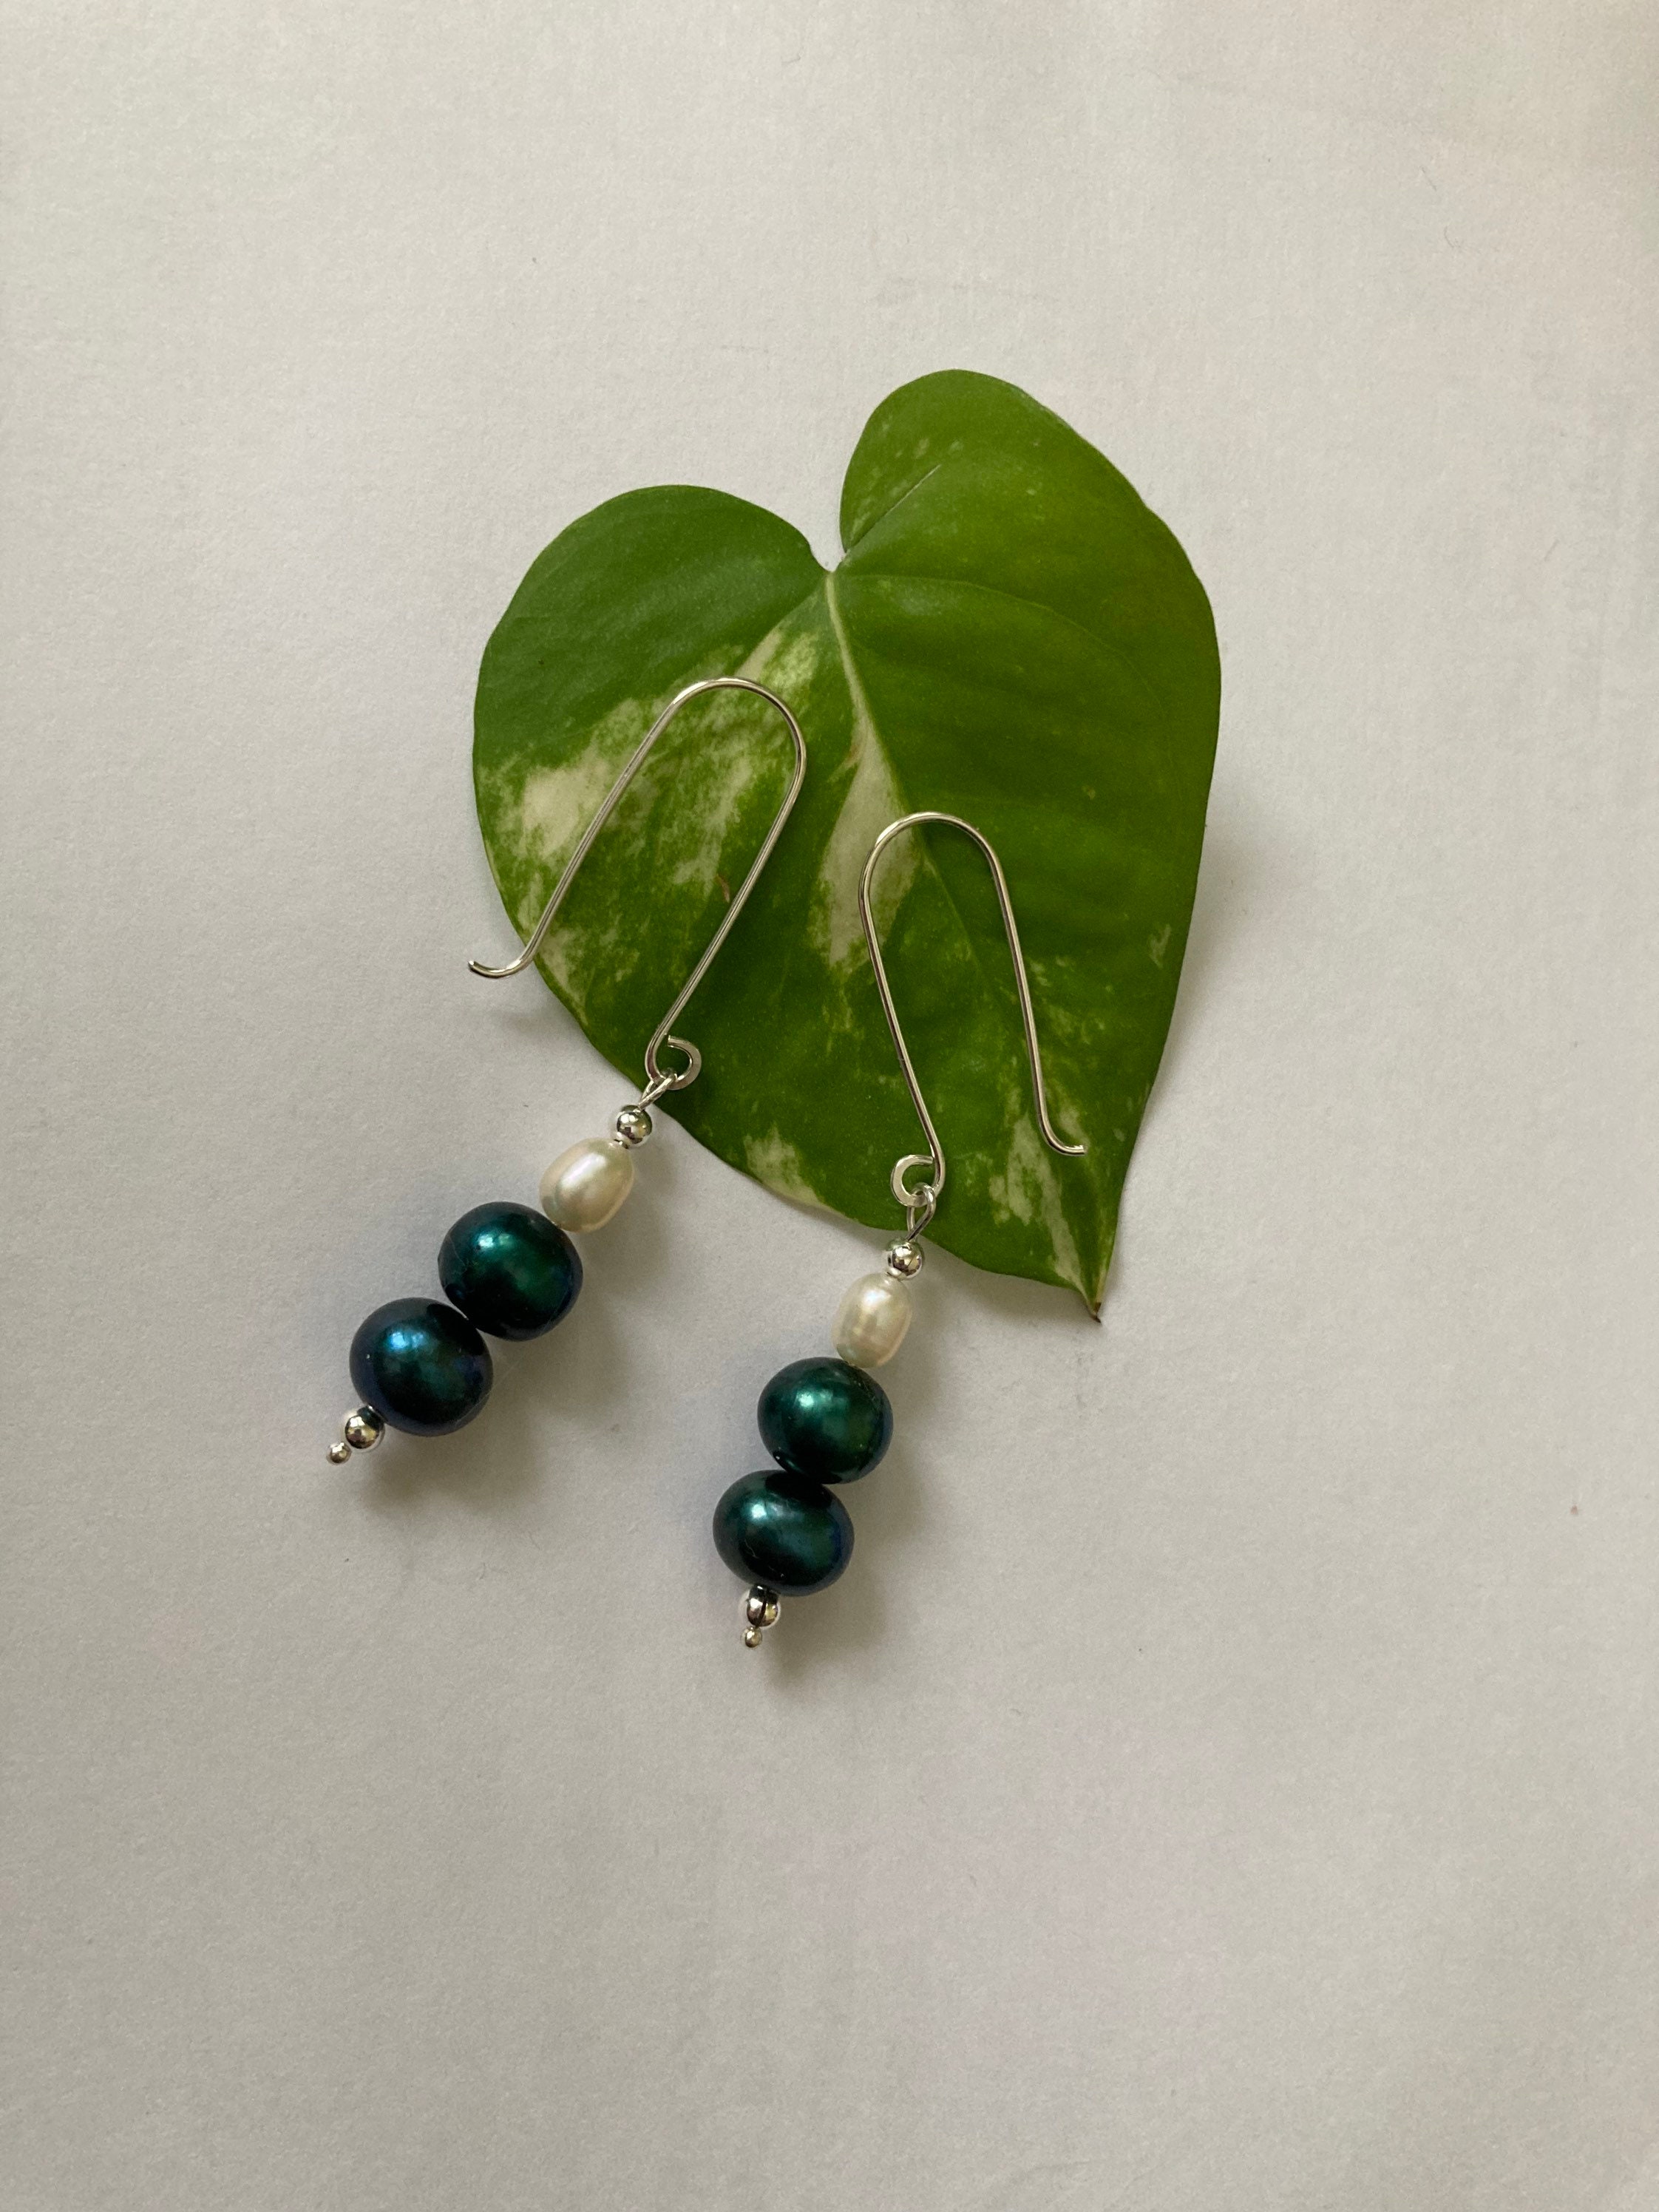 Earrings Pearl Accessories for Women Creative Decoration St Pattys Day  Trendy Jewelries Emerald Pearls Women's 